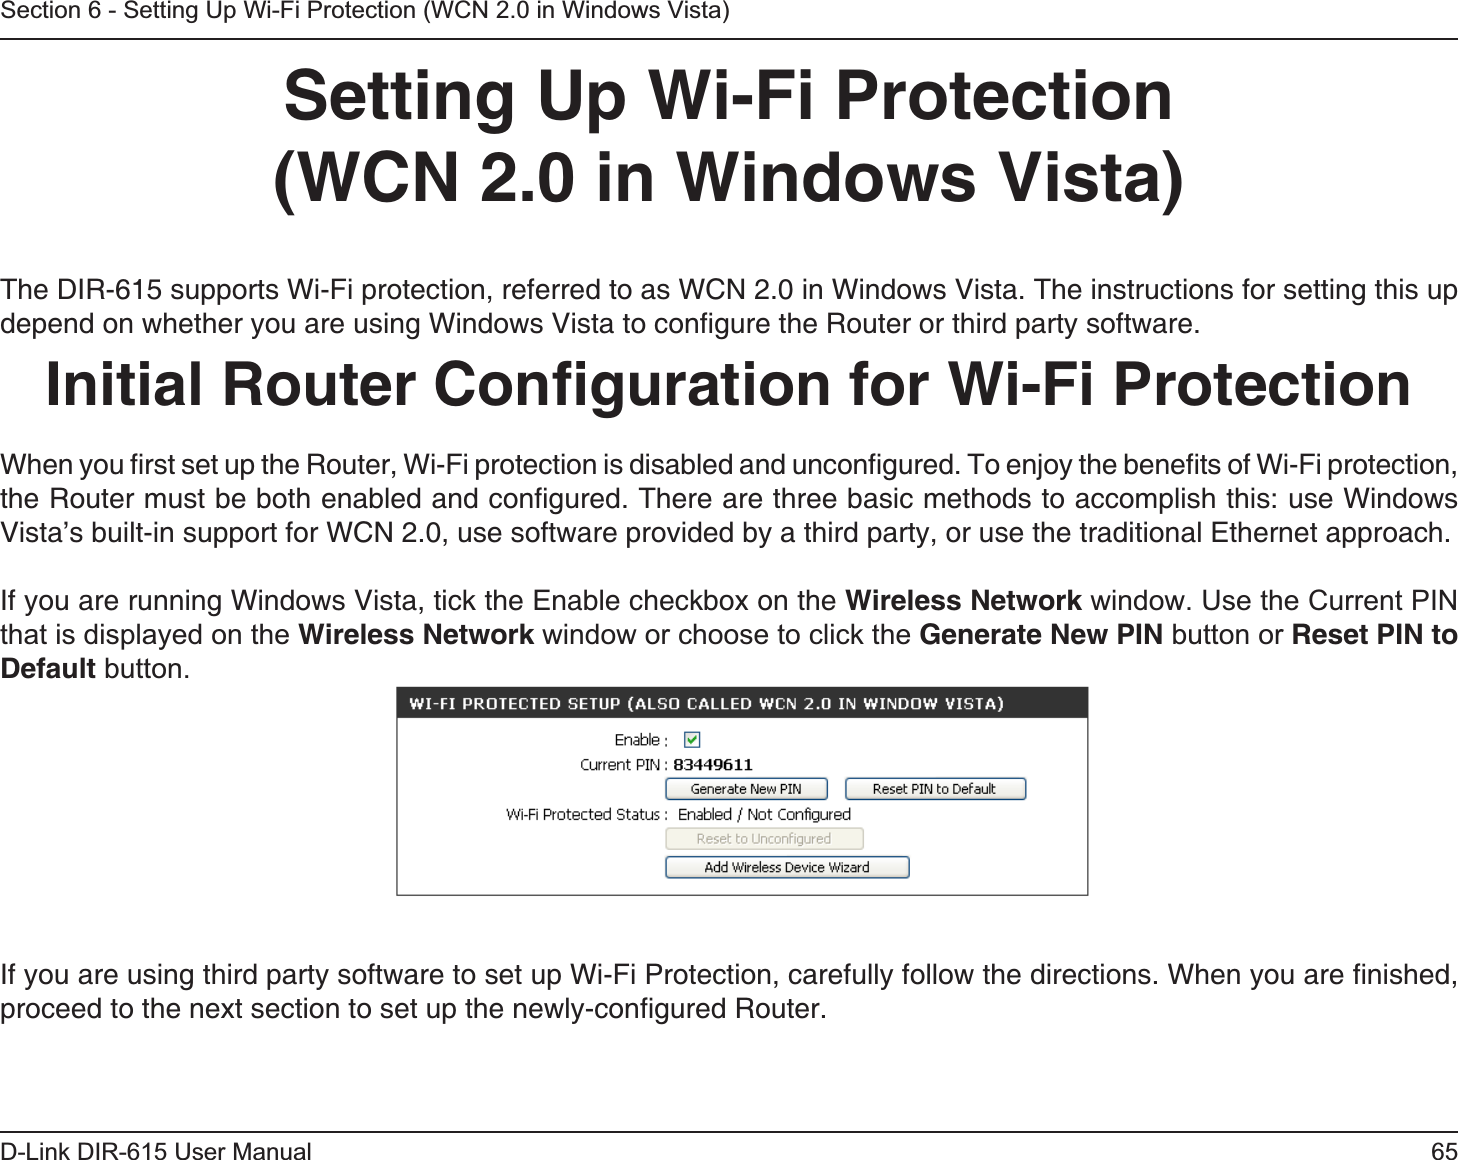 65D-Link DIR-615 User ManualSection 6 - Setting Up Wi-Fi Protection (WCN 2.0 in Windows Vista)Setting Up Wi-Fi Protection(WCN 2.0 in Windows Vista)The DIR-615 supports Wi-Fi protection, referred to as WCN 2.0 in Windows Vista. The instructions for setting this up depend on whether you are using Windows Vista to conﬁgure the Router or third party software.        Initial Router Conﬁguration for Wi-Fi ProtectionWhen you ﬁrst set up the Router, Wi-Fi protection is disabled and unconﬁgured. To enjoy the beneﬁts of Wi-Fi protection, the Router must be both enabled and conﬁgured. There are three basic methods to accomplish this: use Windows Vista’s built-in support for WCN 2.0, use software provided by a third party, or use the traditional Ethernet approach. If you are running Windows Vista, tick the Enable checkbox on the Wireless Network window. Use the Current PIN that is displayed on the Wireless Network window or choose to click the Generate New PIN button or Reset PIN to Default button. If you are using third party software to set up Wi-Fi Protection, carefully follow the directions. When you are ﬁnished, proceed to the next section to set up the newly-conﬁgured Router.